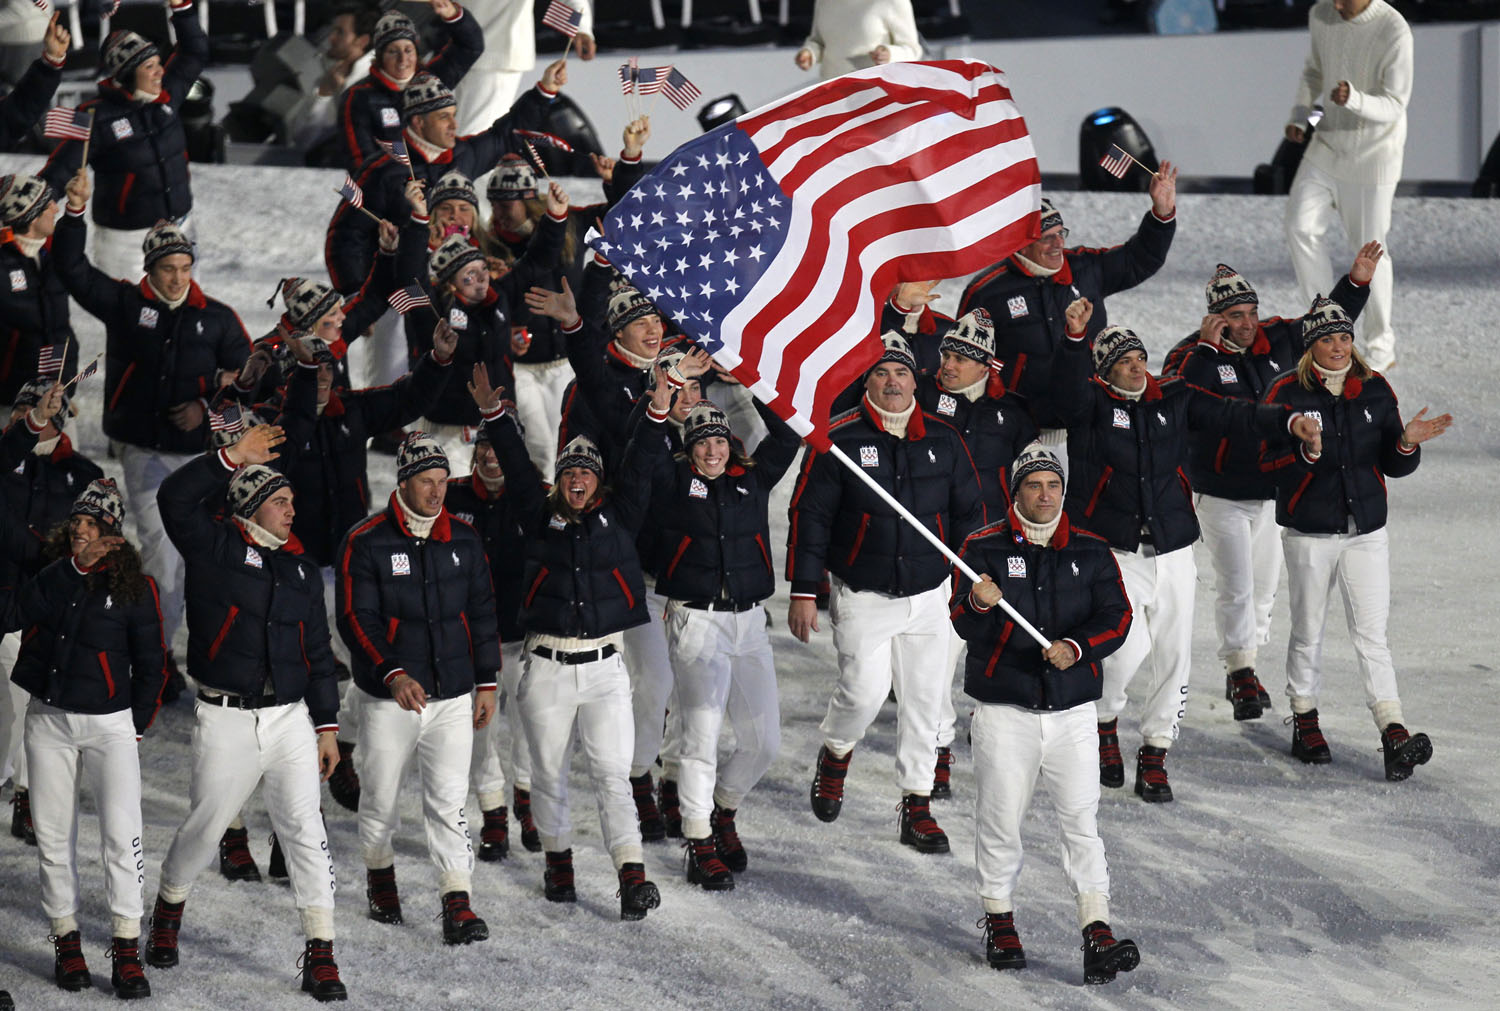 Luger Mark Grimmette bears the American flag and leads his delegation during the opening ceremony of the Vancouver Winter Olympics, Feb. 12, 2010.